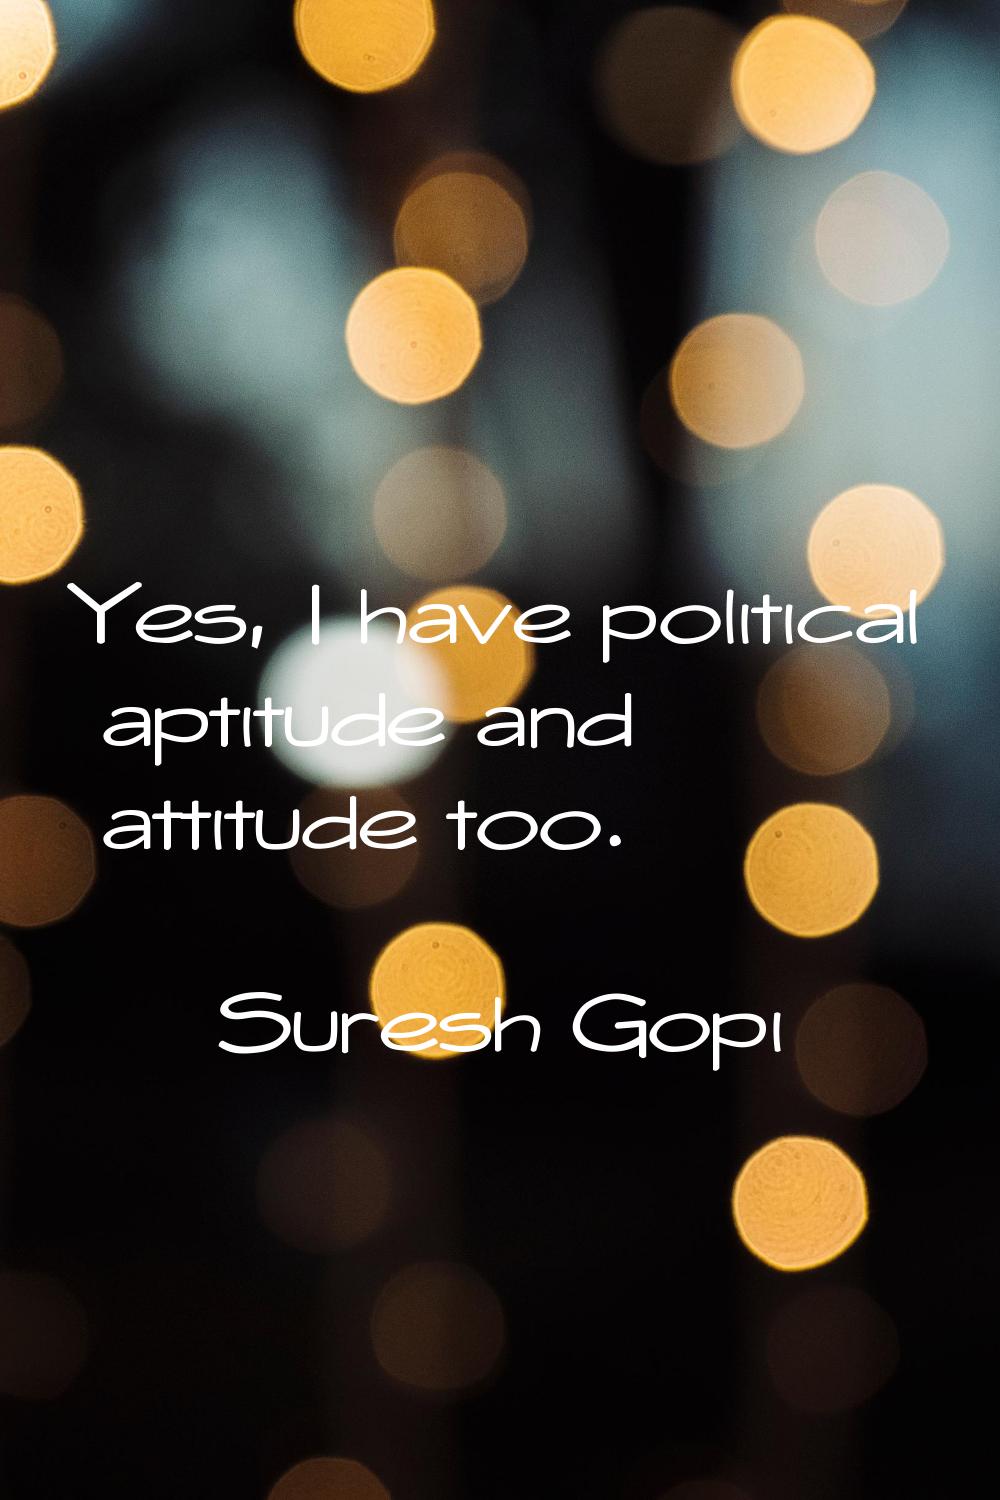 Yes, I have political aptitude and attitude too.